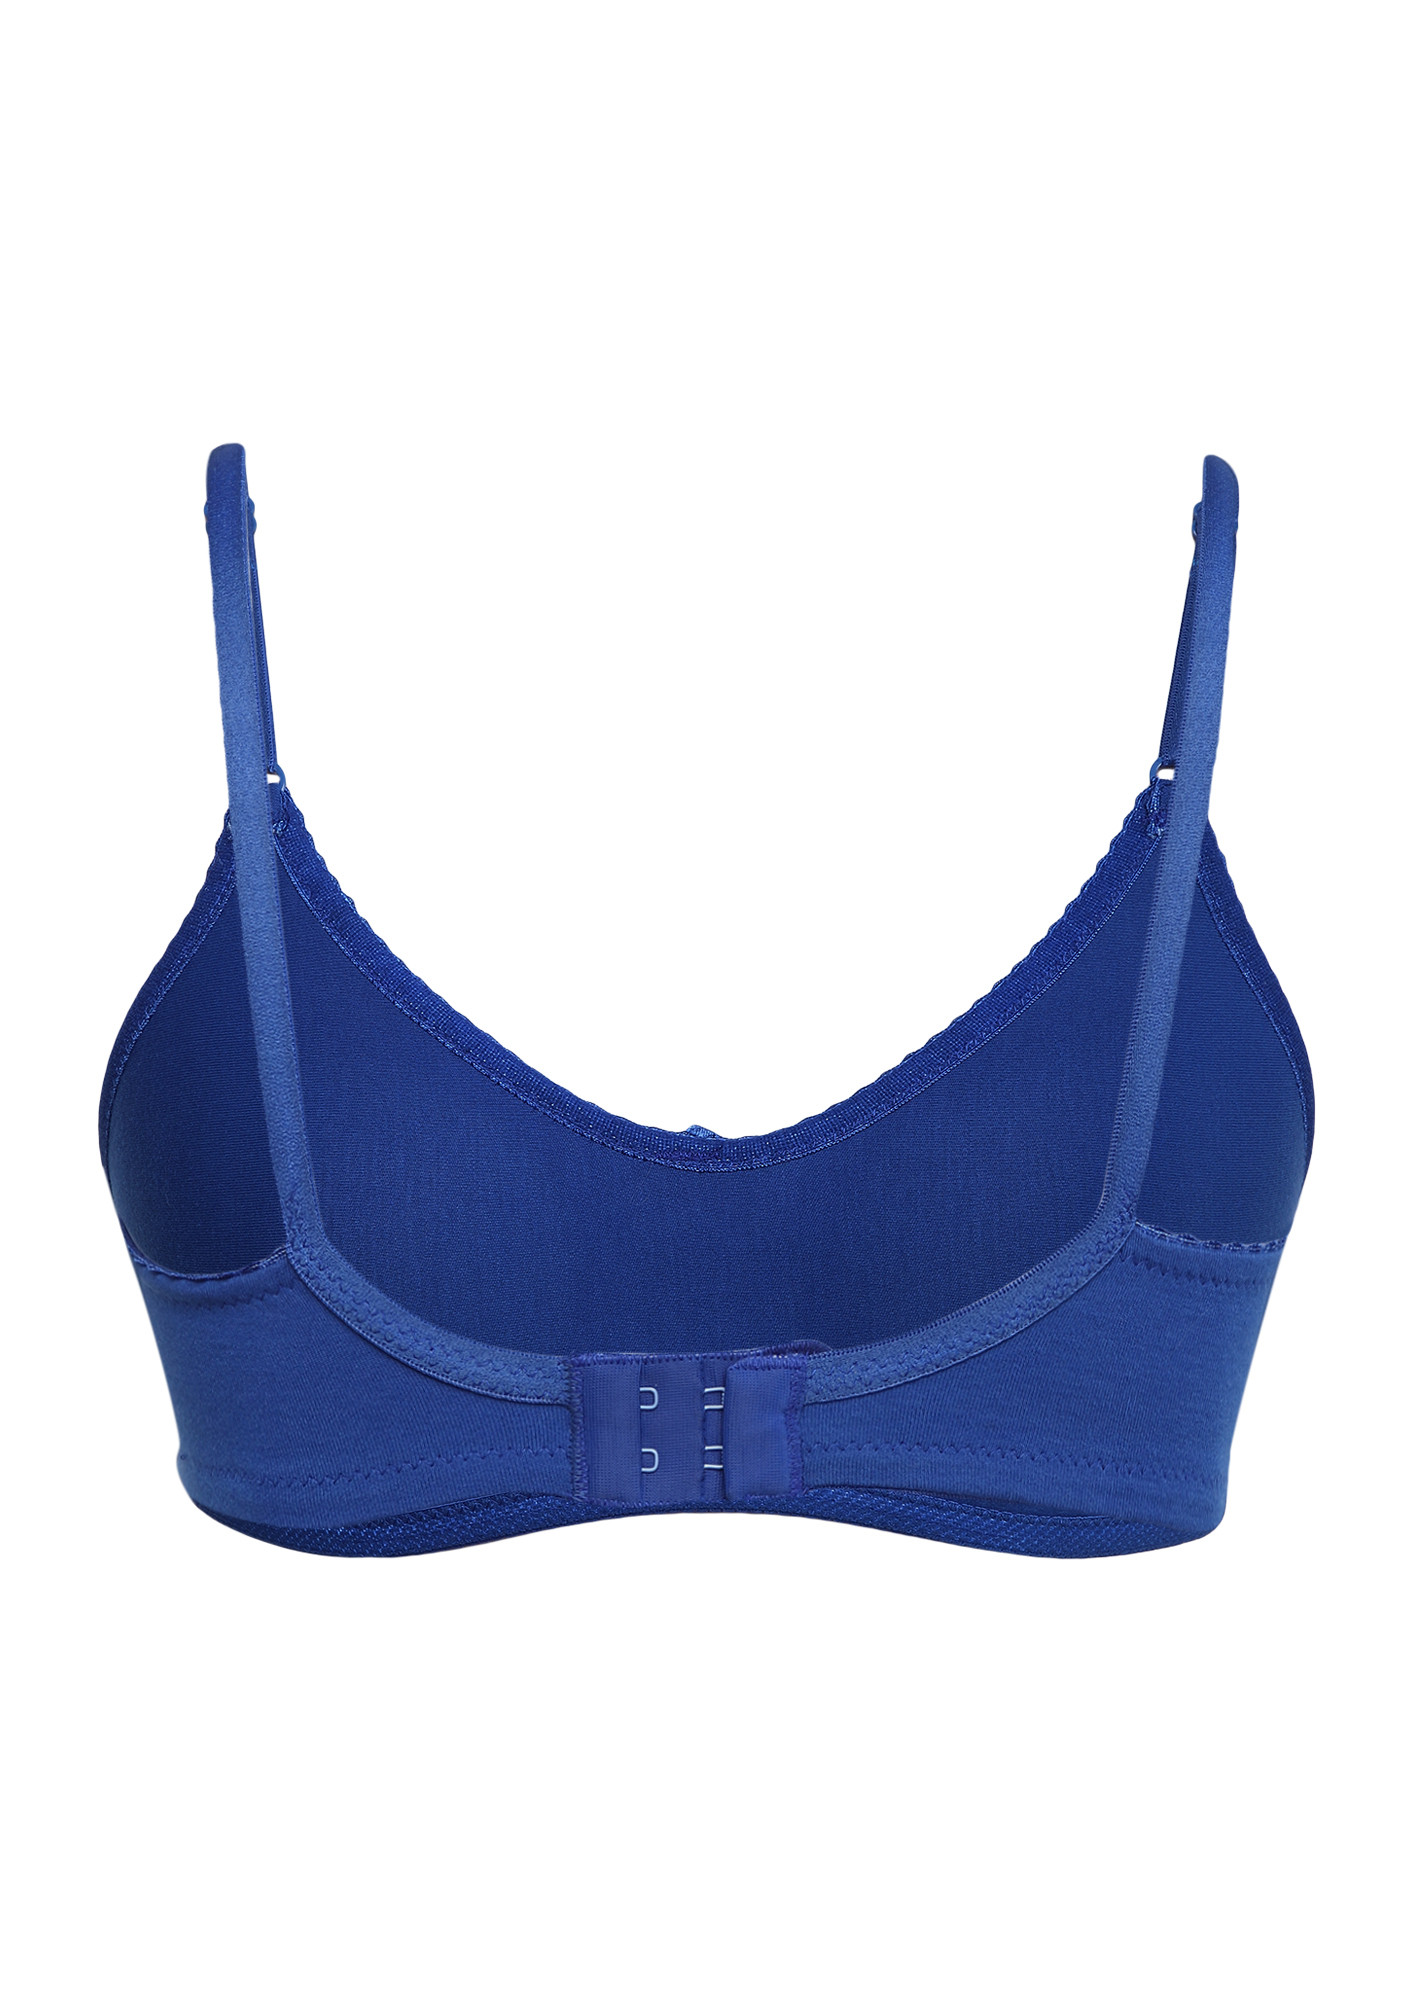 Carefree Casuals Padded Non-Wired Bra - Royal Blue